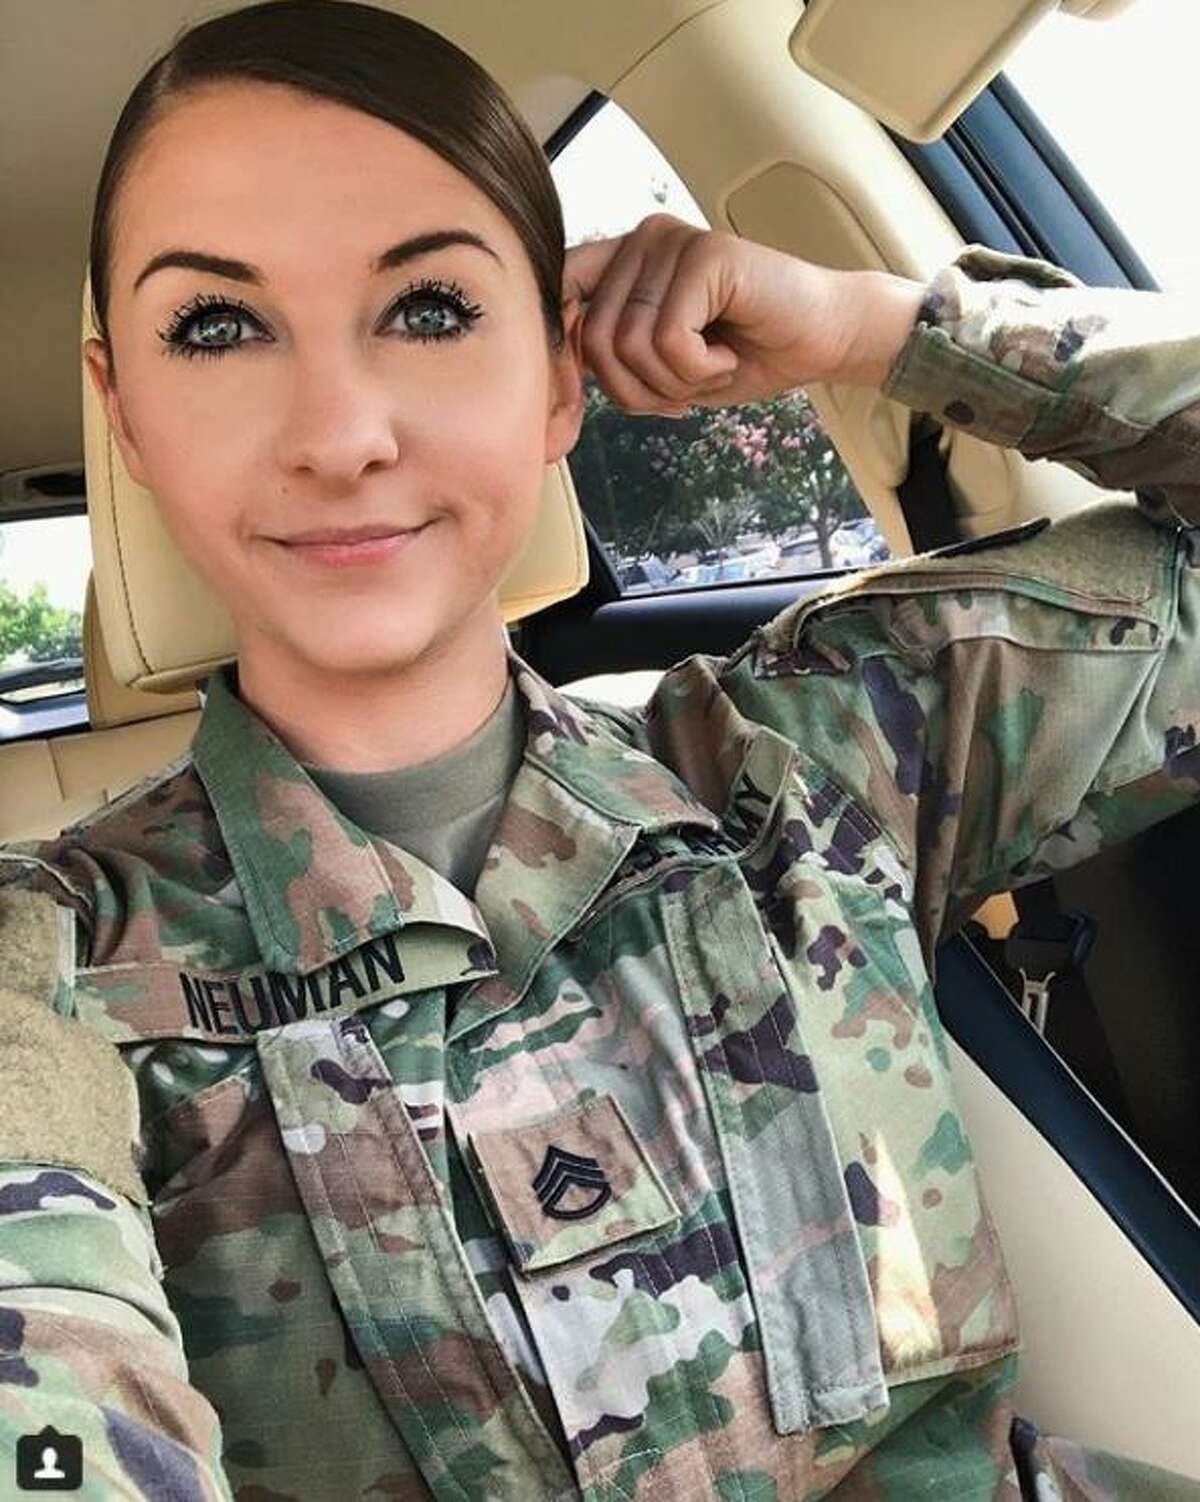 Alicia Neuman doesn't just post fitness and fashion selfies. Her Instagram account also has its share of pics of herself in her Army fatigues.